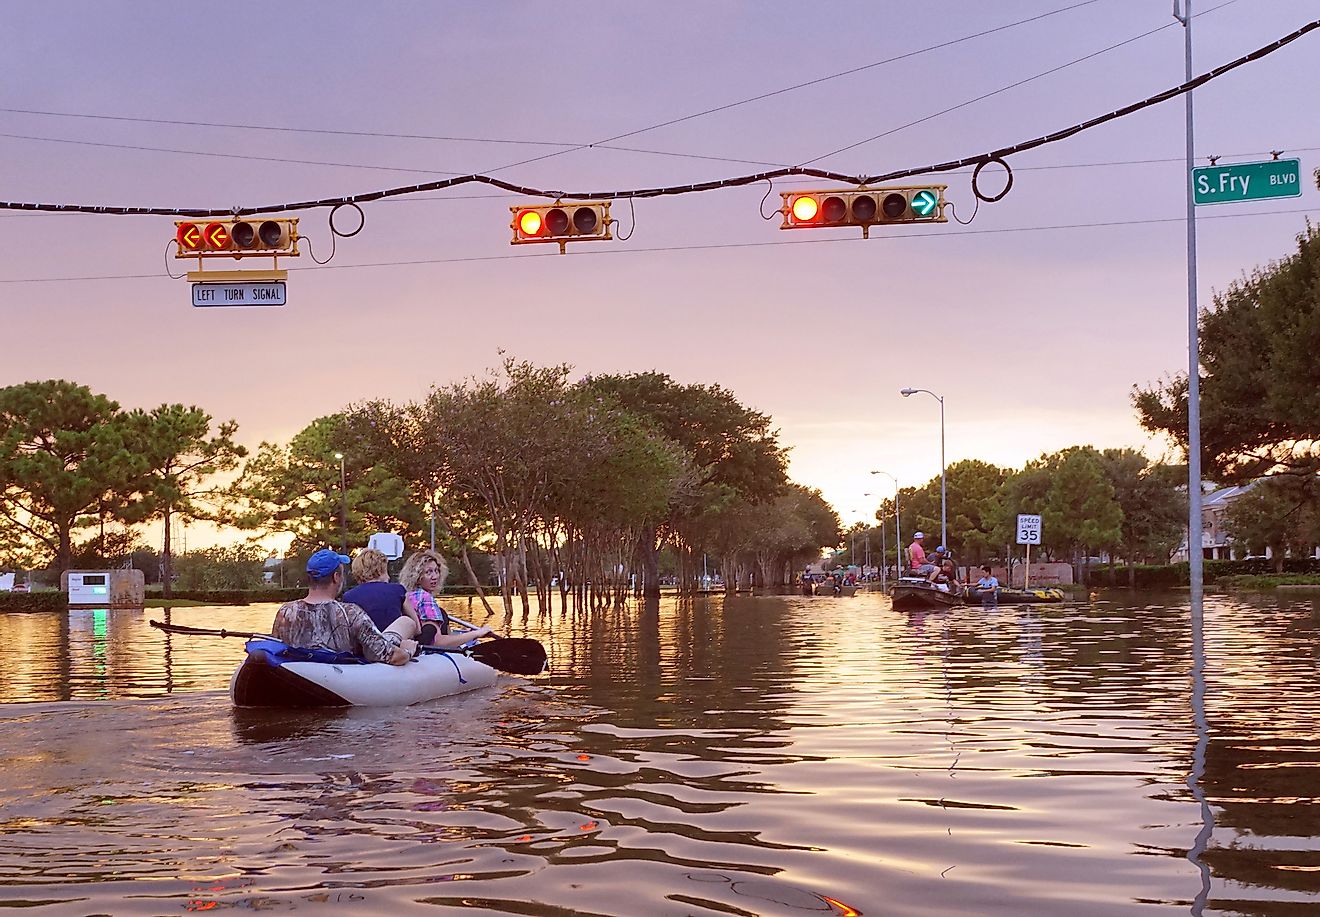 Traffic lights over flooded Houston streets and boats with people at sunset inTexas, USA. Image credit: Irina K/shutterstock.com